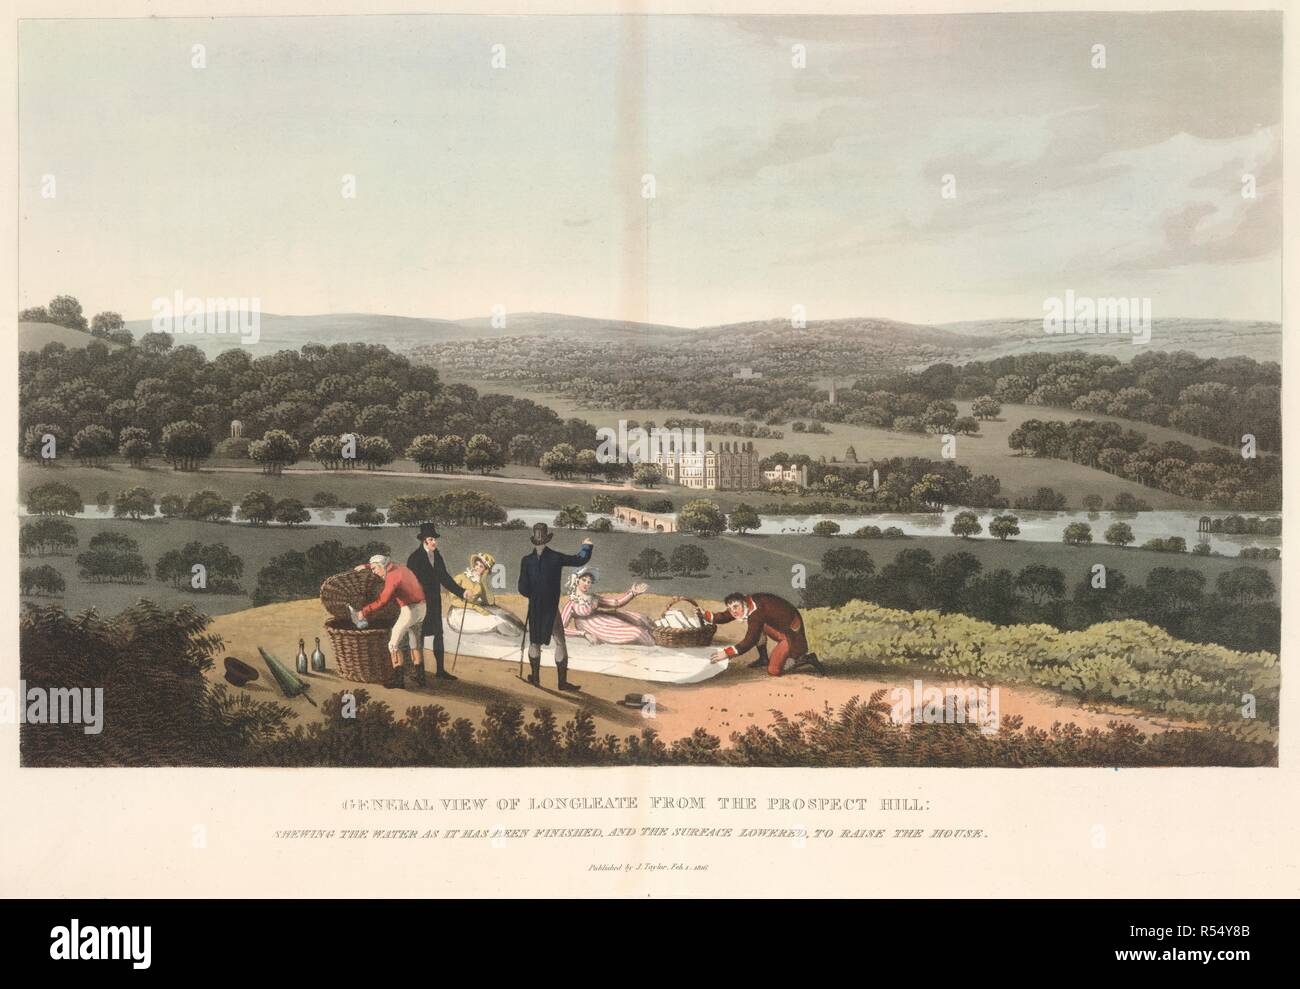 Longleat House. Fragments on the theory and practice of Landscape. London, 1816. General view of Longleat House, from the Prospect Hill.  Image taken from Fragments on the theory and practice of Landscape Gardening, including some remarks on Grecian and Gothic Architecture. By H. Repton, assisted by his son J. A. Repton.  Originally published/produced in London, 1816. . Source: 59.e.20, between 122/123. Stock Photo